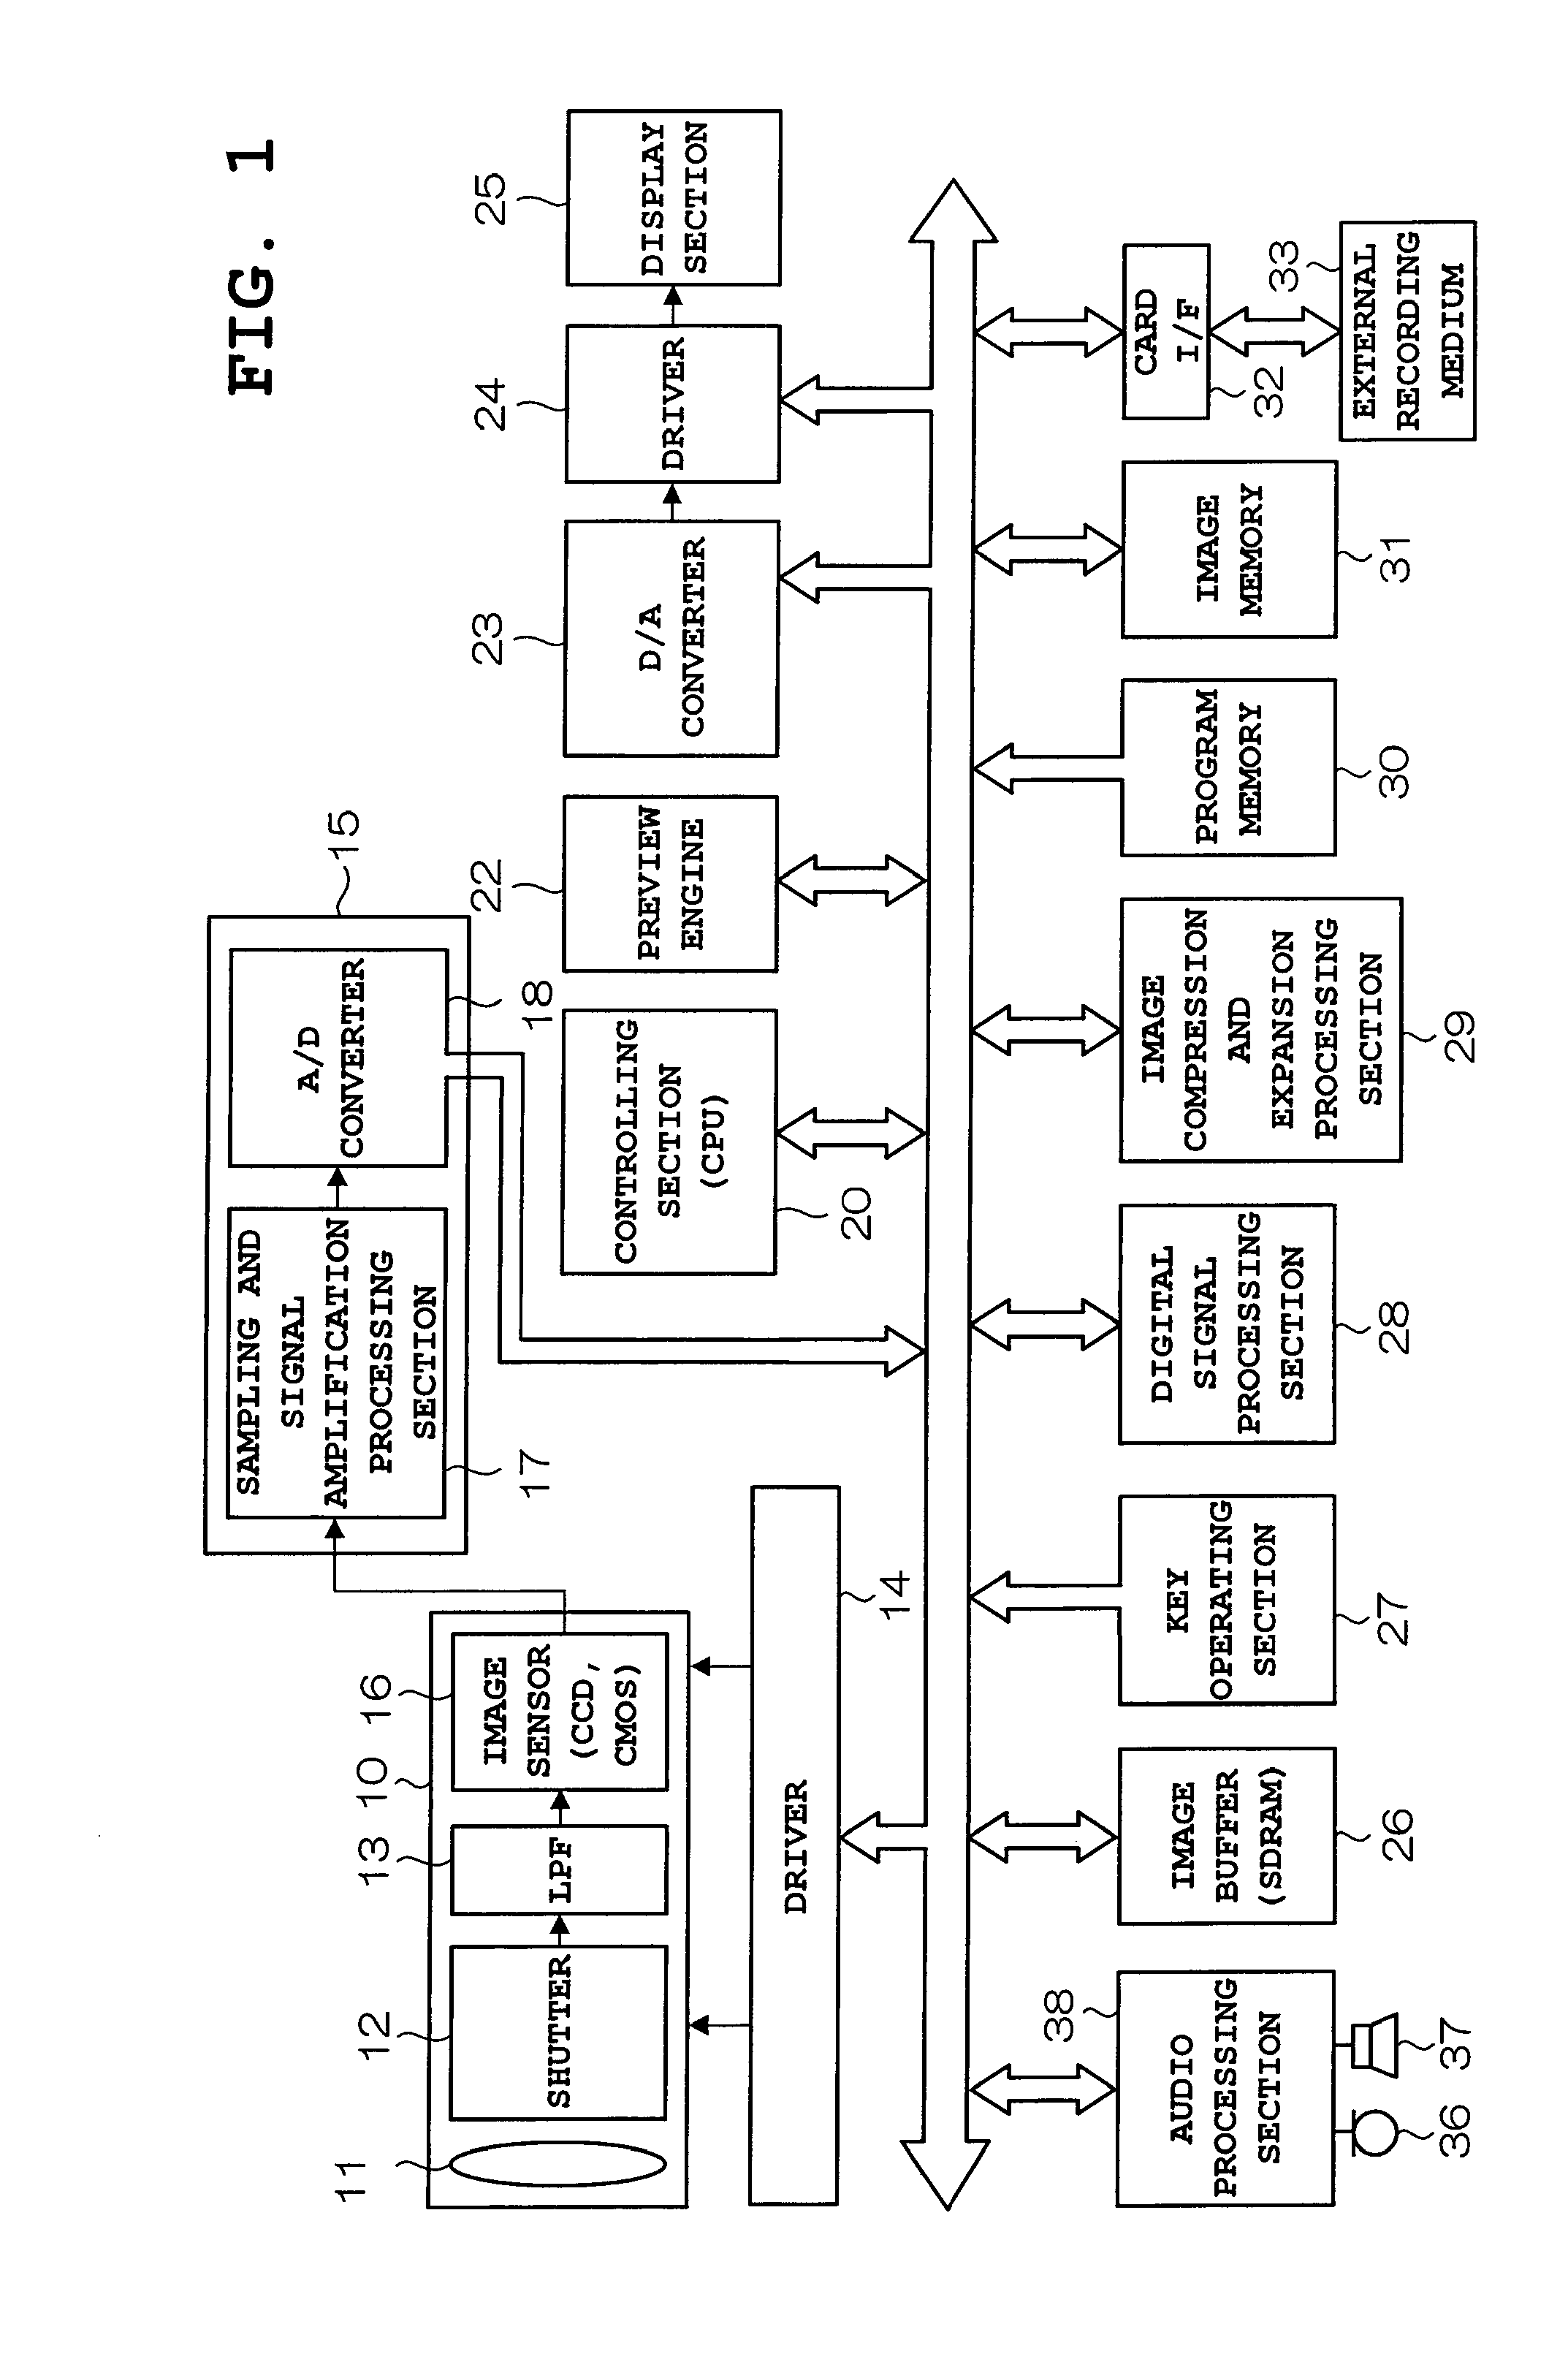 Imaging apparatus having a zoom function